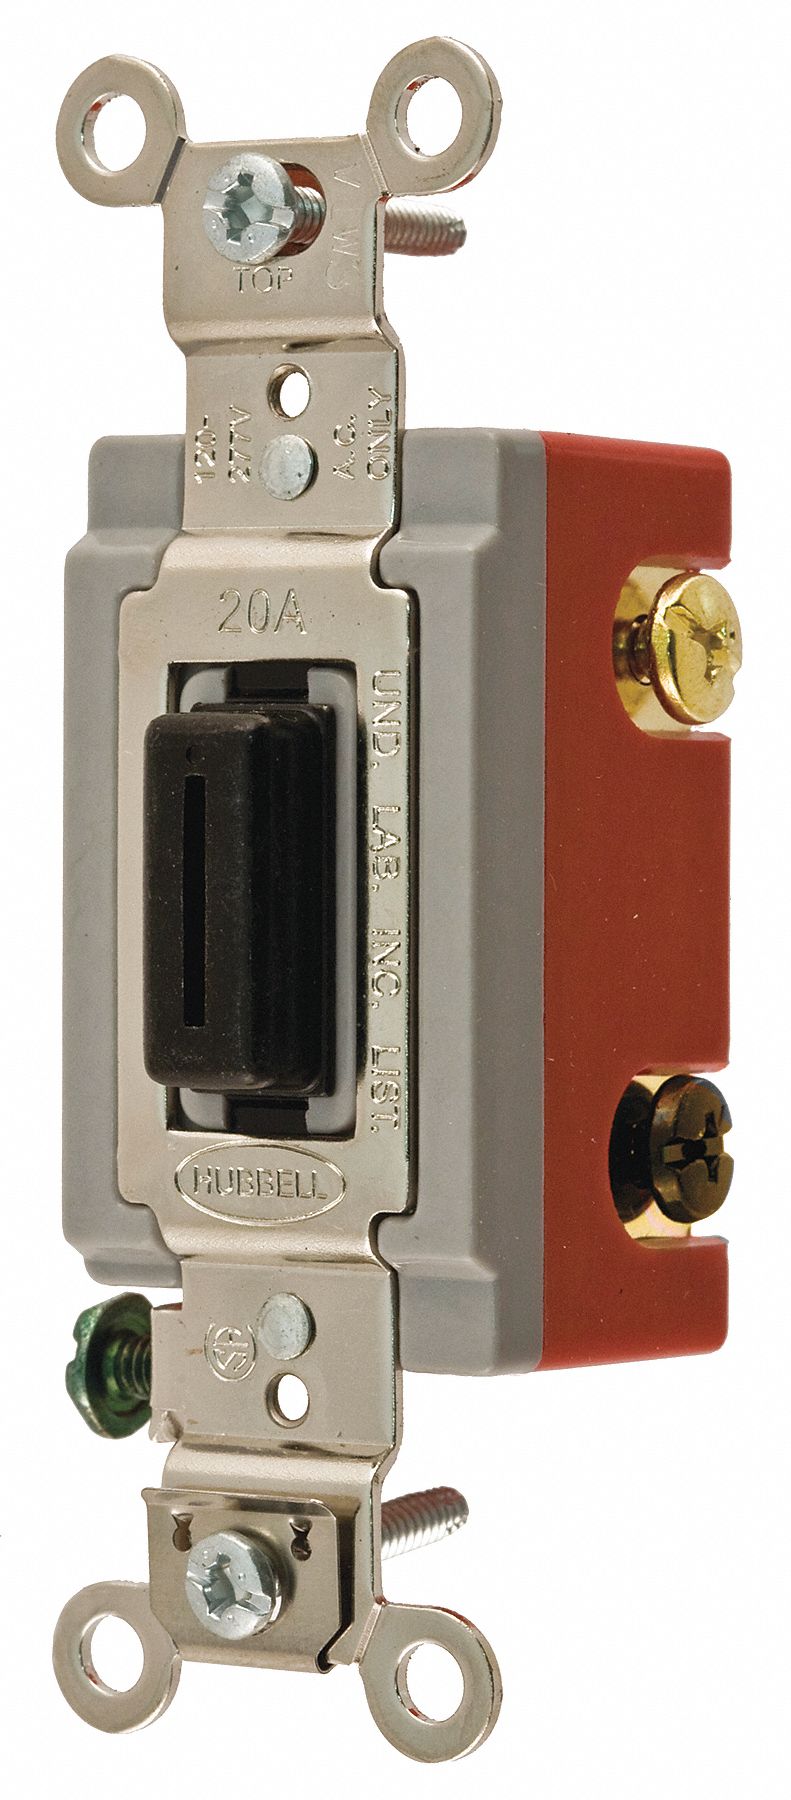 HUBBELL WIRING DEVICEKELLEMS Wall Switch, 3Way, Maintained, Locking Toggle 5Z729HBL1223L